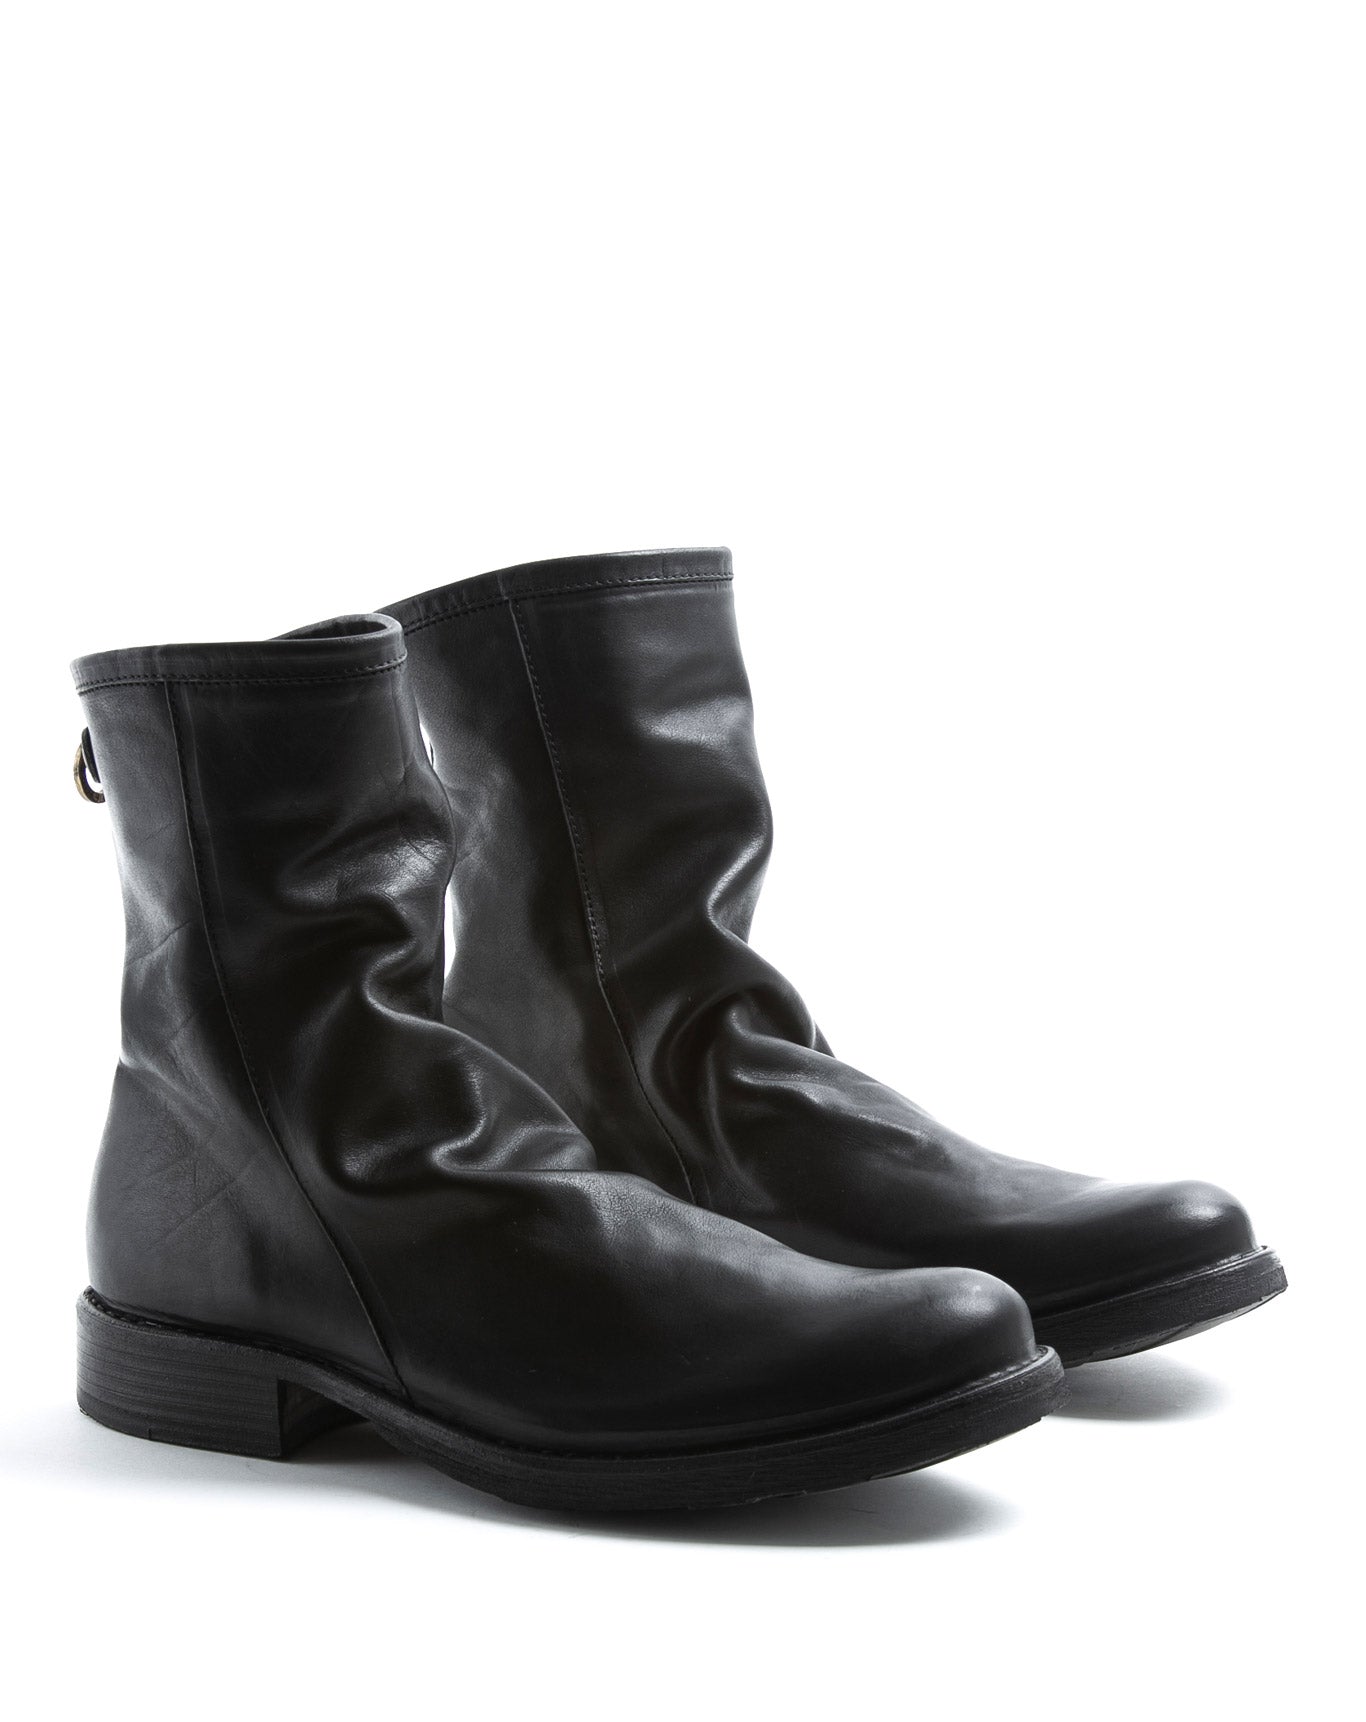 FIORENTINI + BAKER, ETERNITY EVEN, Simple yet stylish unisex ankle boot, ideal for all seasons. Handcrafted with natural leather by skilled artisans. Made in Italy. Made to last.